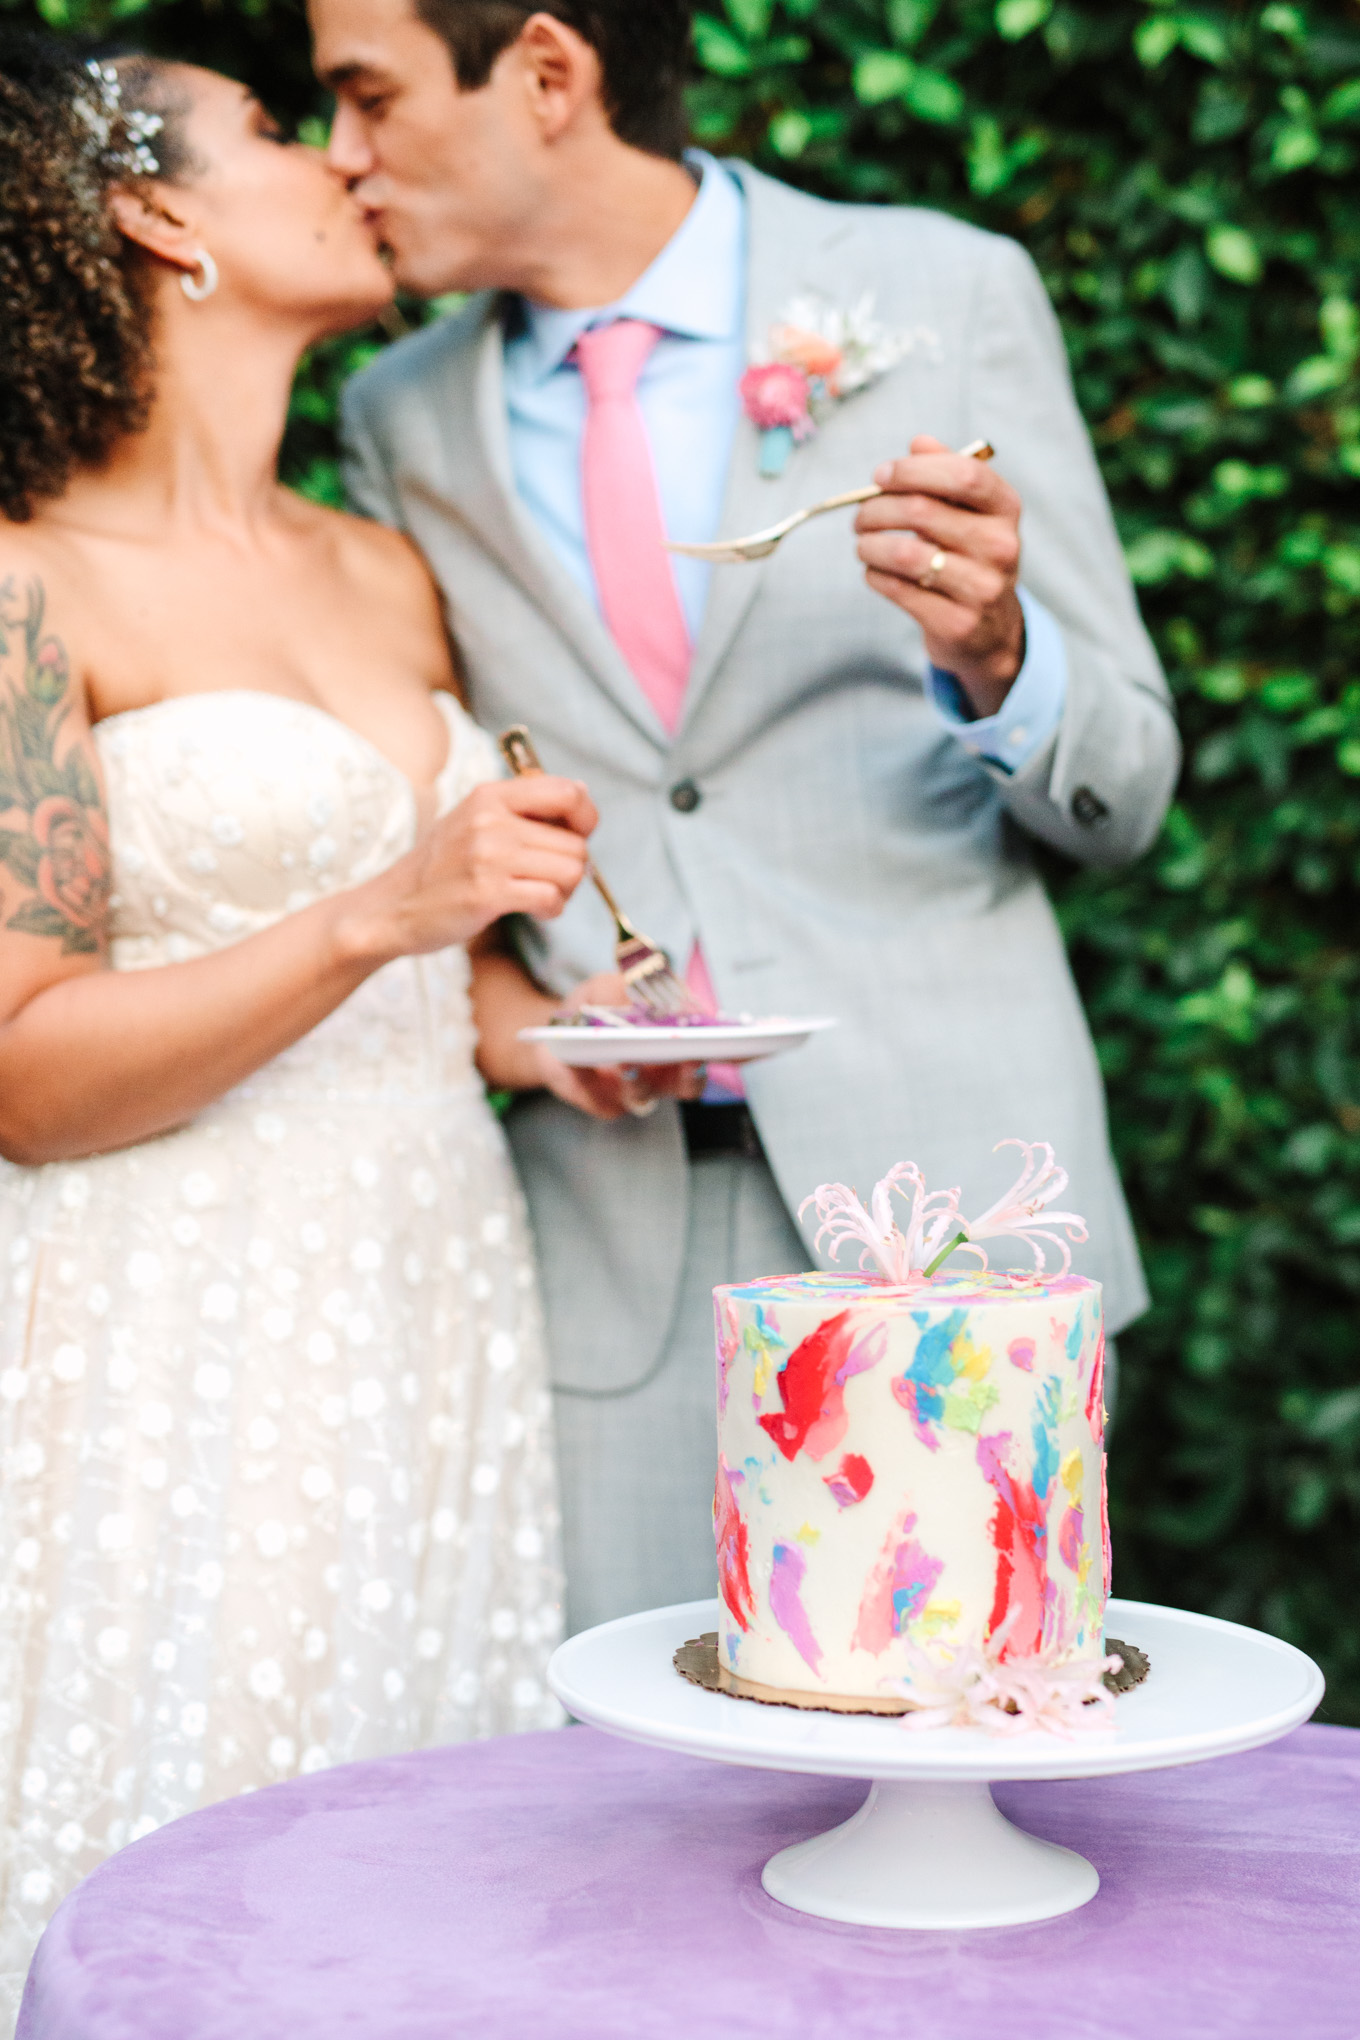 Bride and groom cutting colorful watercolor taro cake by Flouring LA | Colorful pop-up micro wedding at The Ruby Street Los Angeles featured on Green Wedding Shoes | Colorful and elevated photography for fun-loving couples in Southern California | #colorfulwedding #popupwedding #weddingphotography #microwedding Source: Mary Costa Photography | Los Angeles